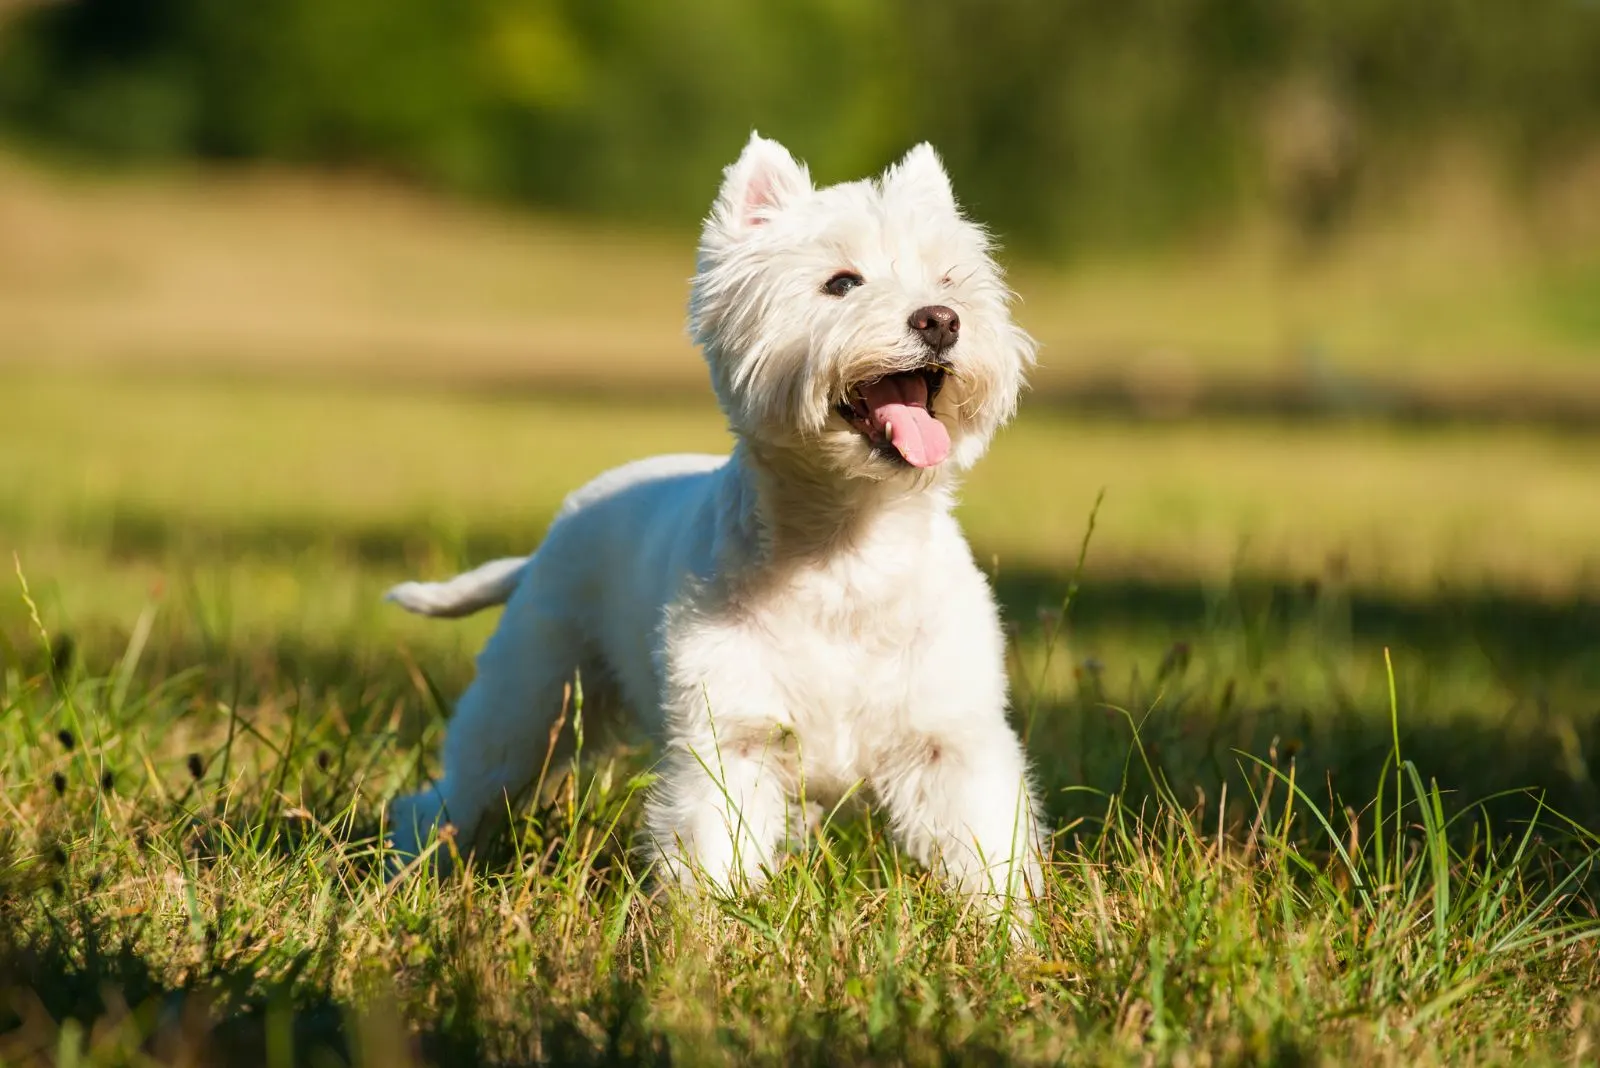 West Highland Terrier in a field